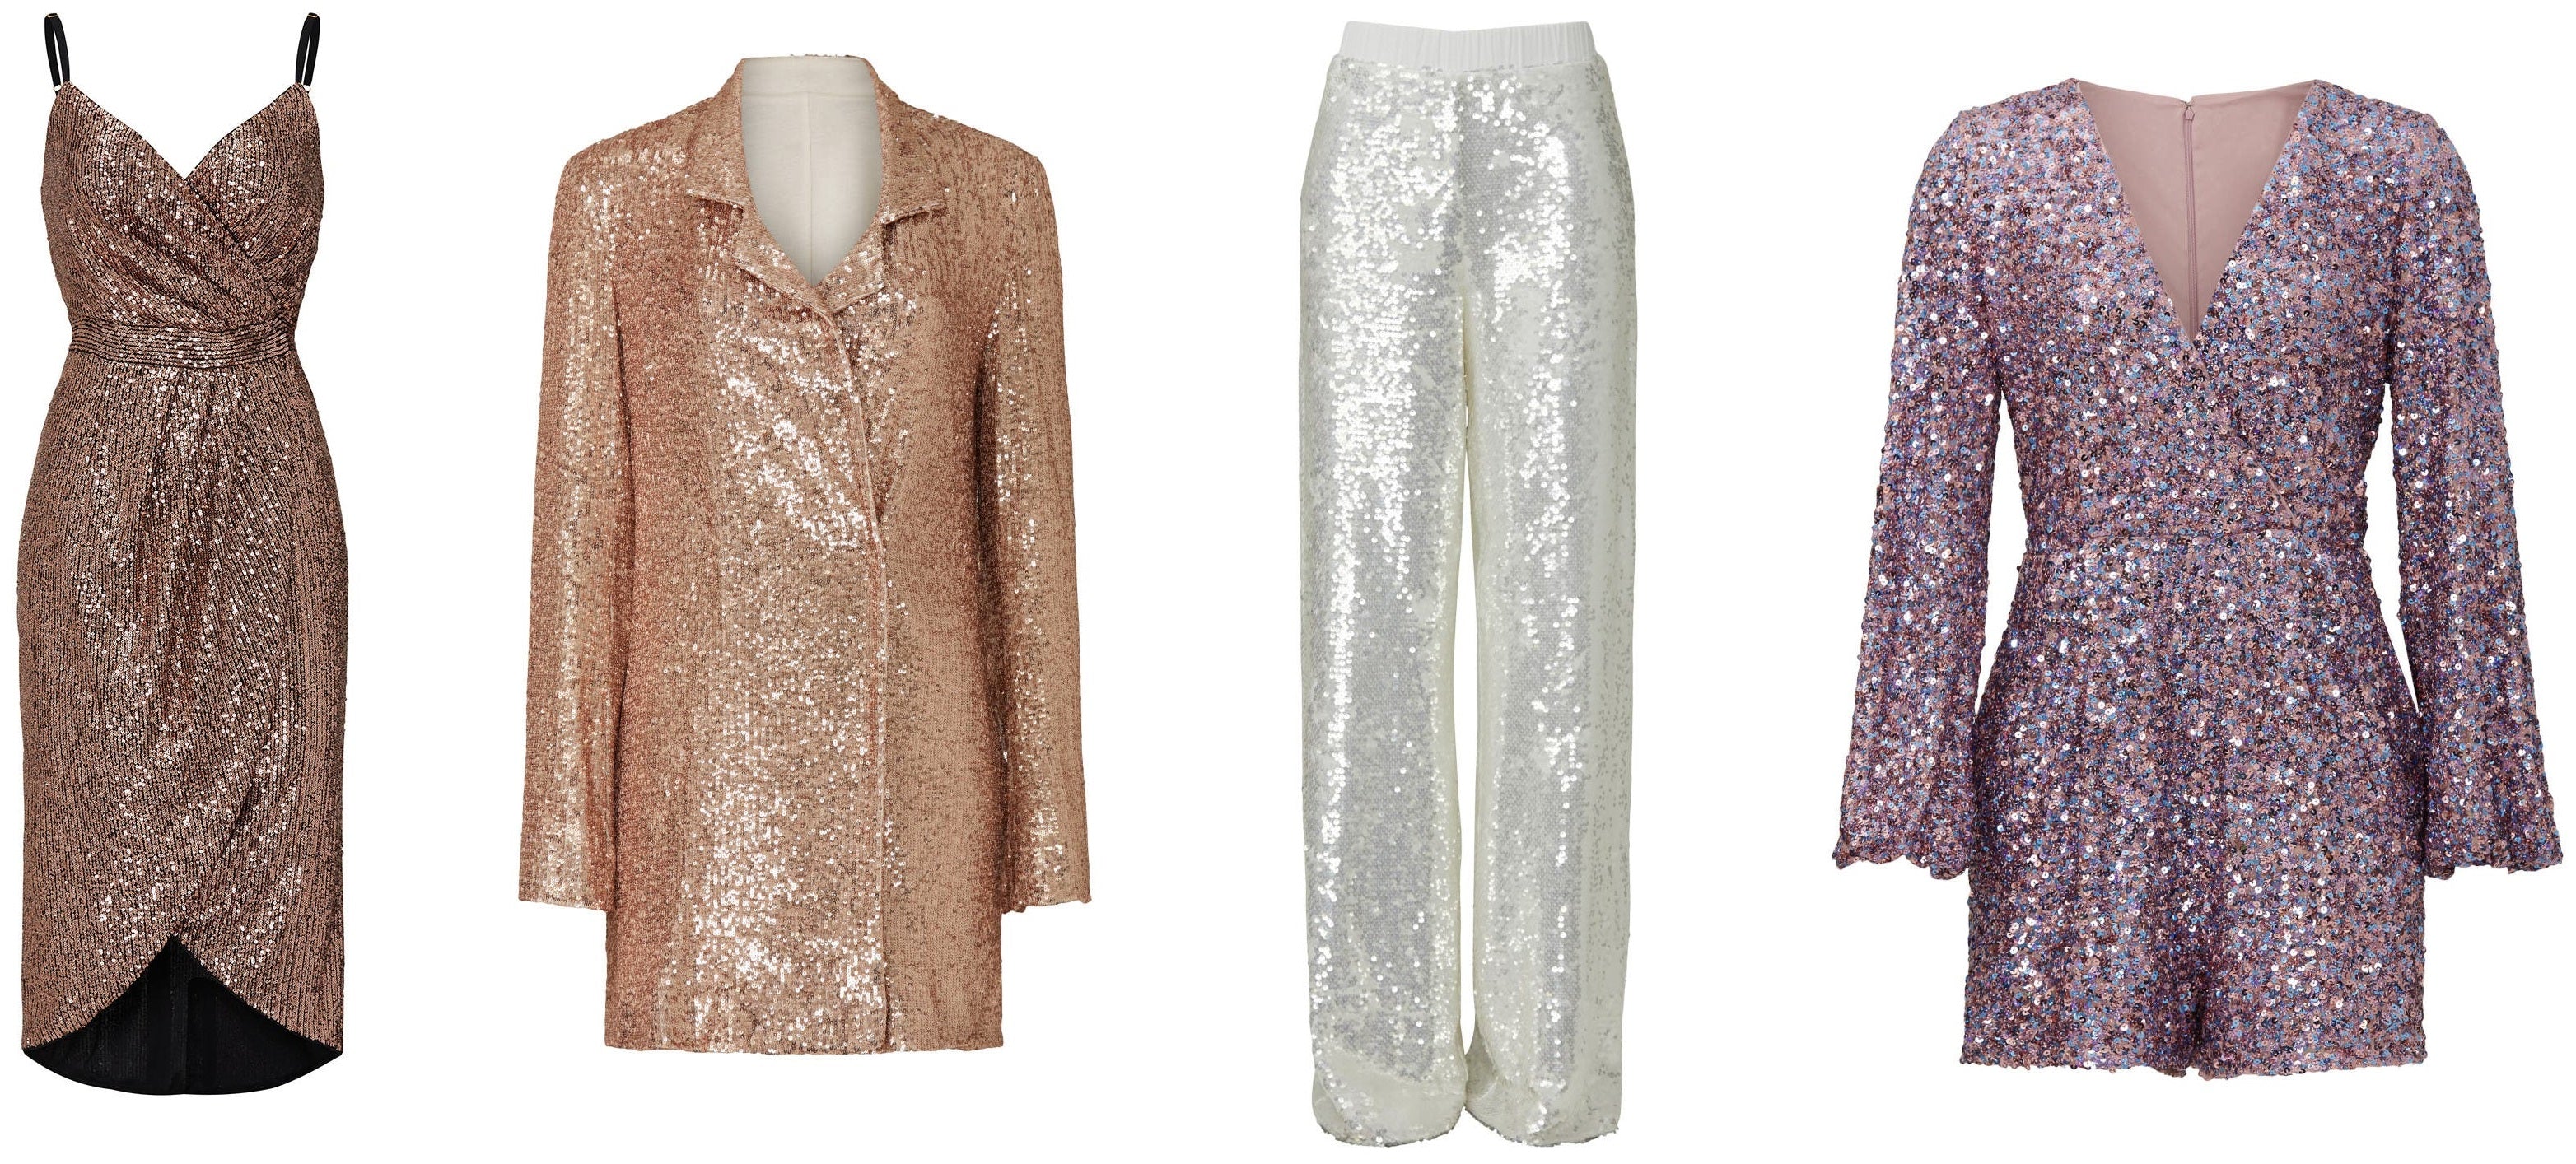 How to Shape: The Best NYE Outfits